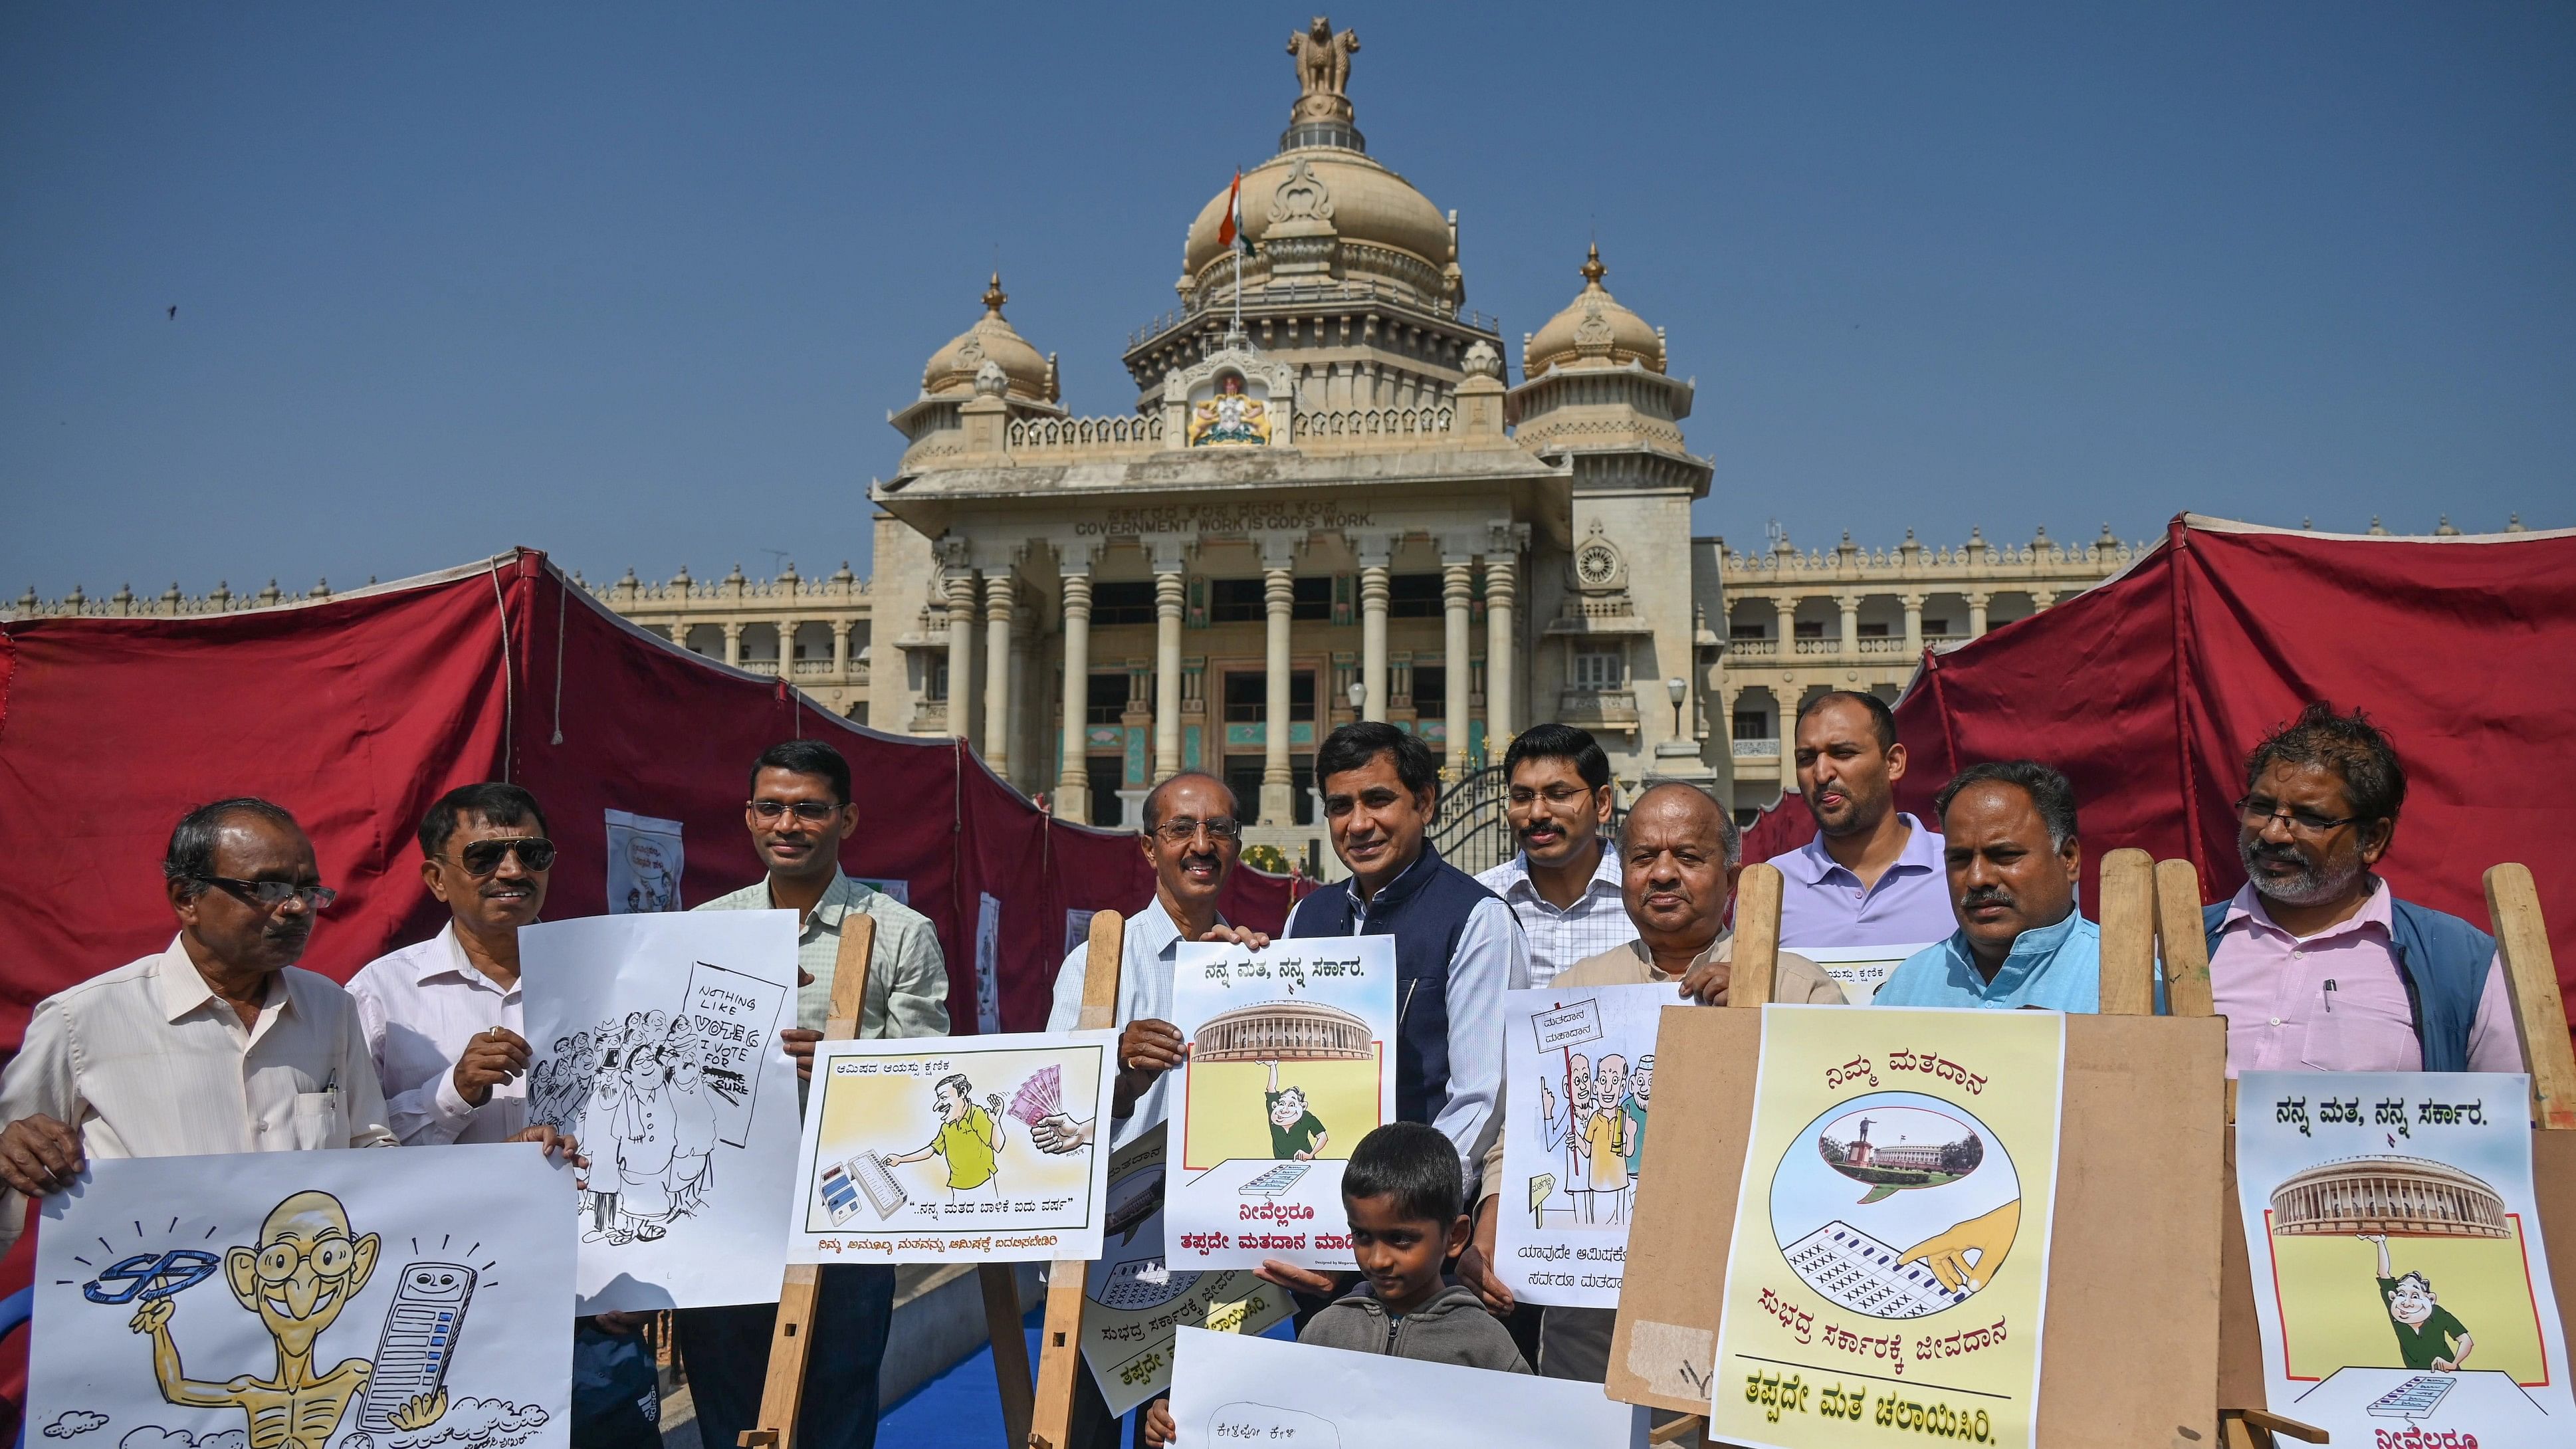 <div class="paragraphs"><p>Manoj Kumar Meena, Chief Election Commissioner of Karnataka, along with artists at the State-level Cartoonist Workshop and Exhibition held in front of the Vidhana Soudha on Sunday.&nbsp;</p></div>